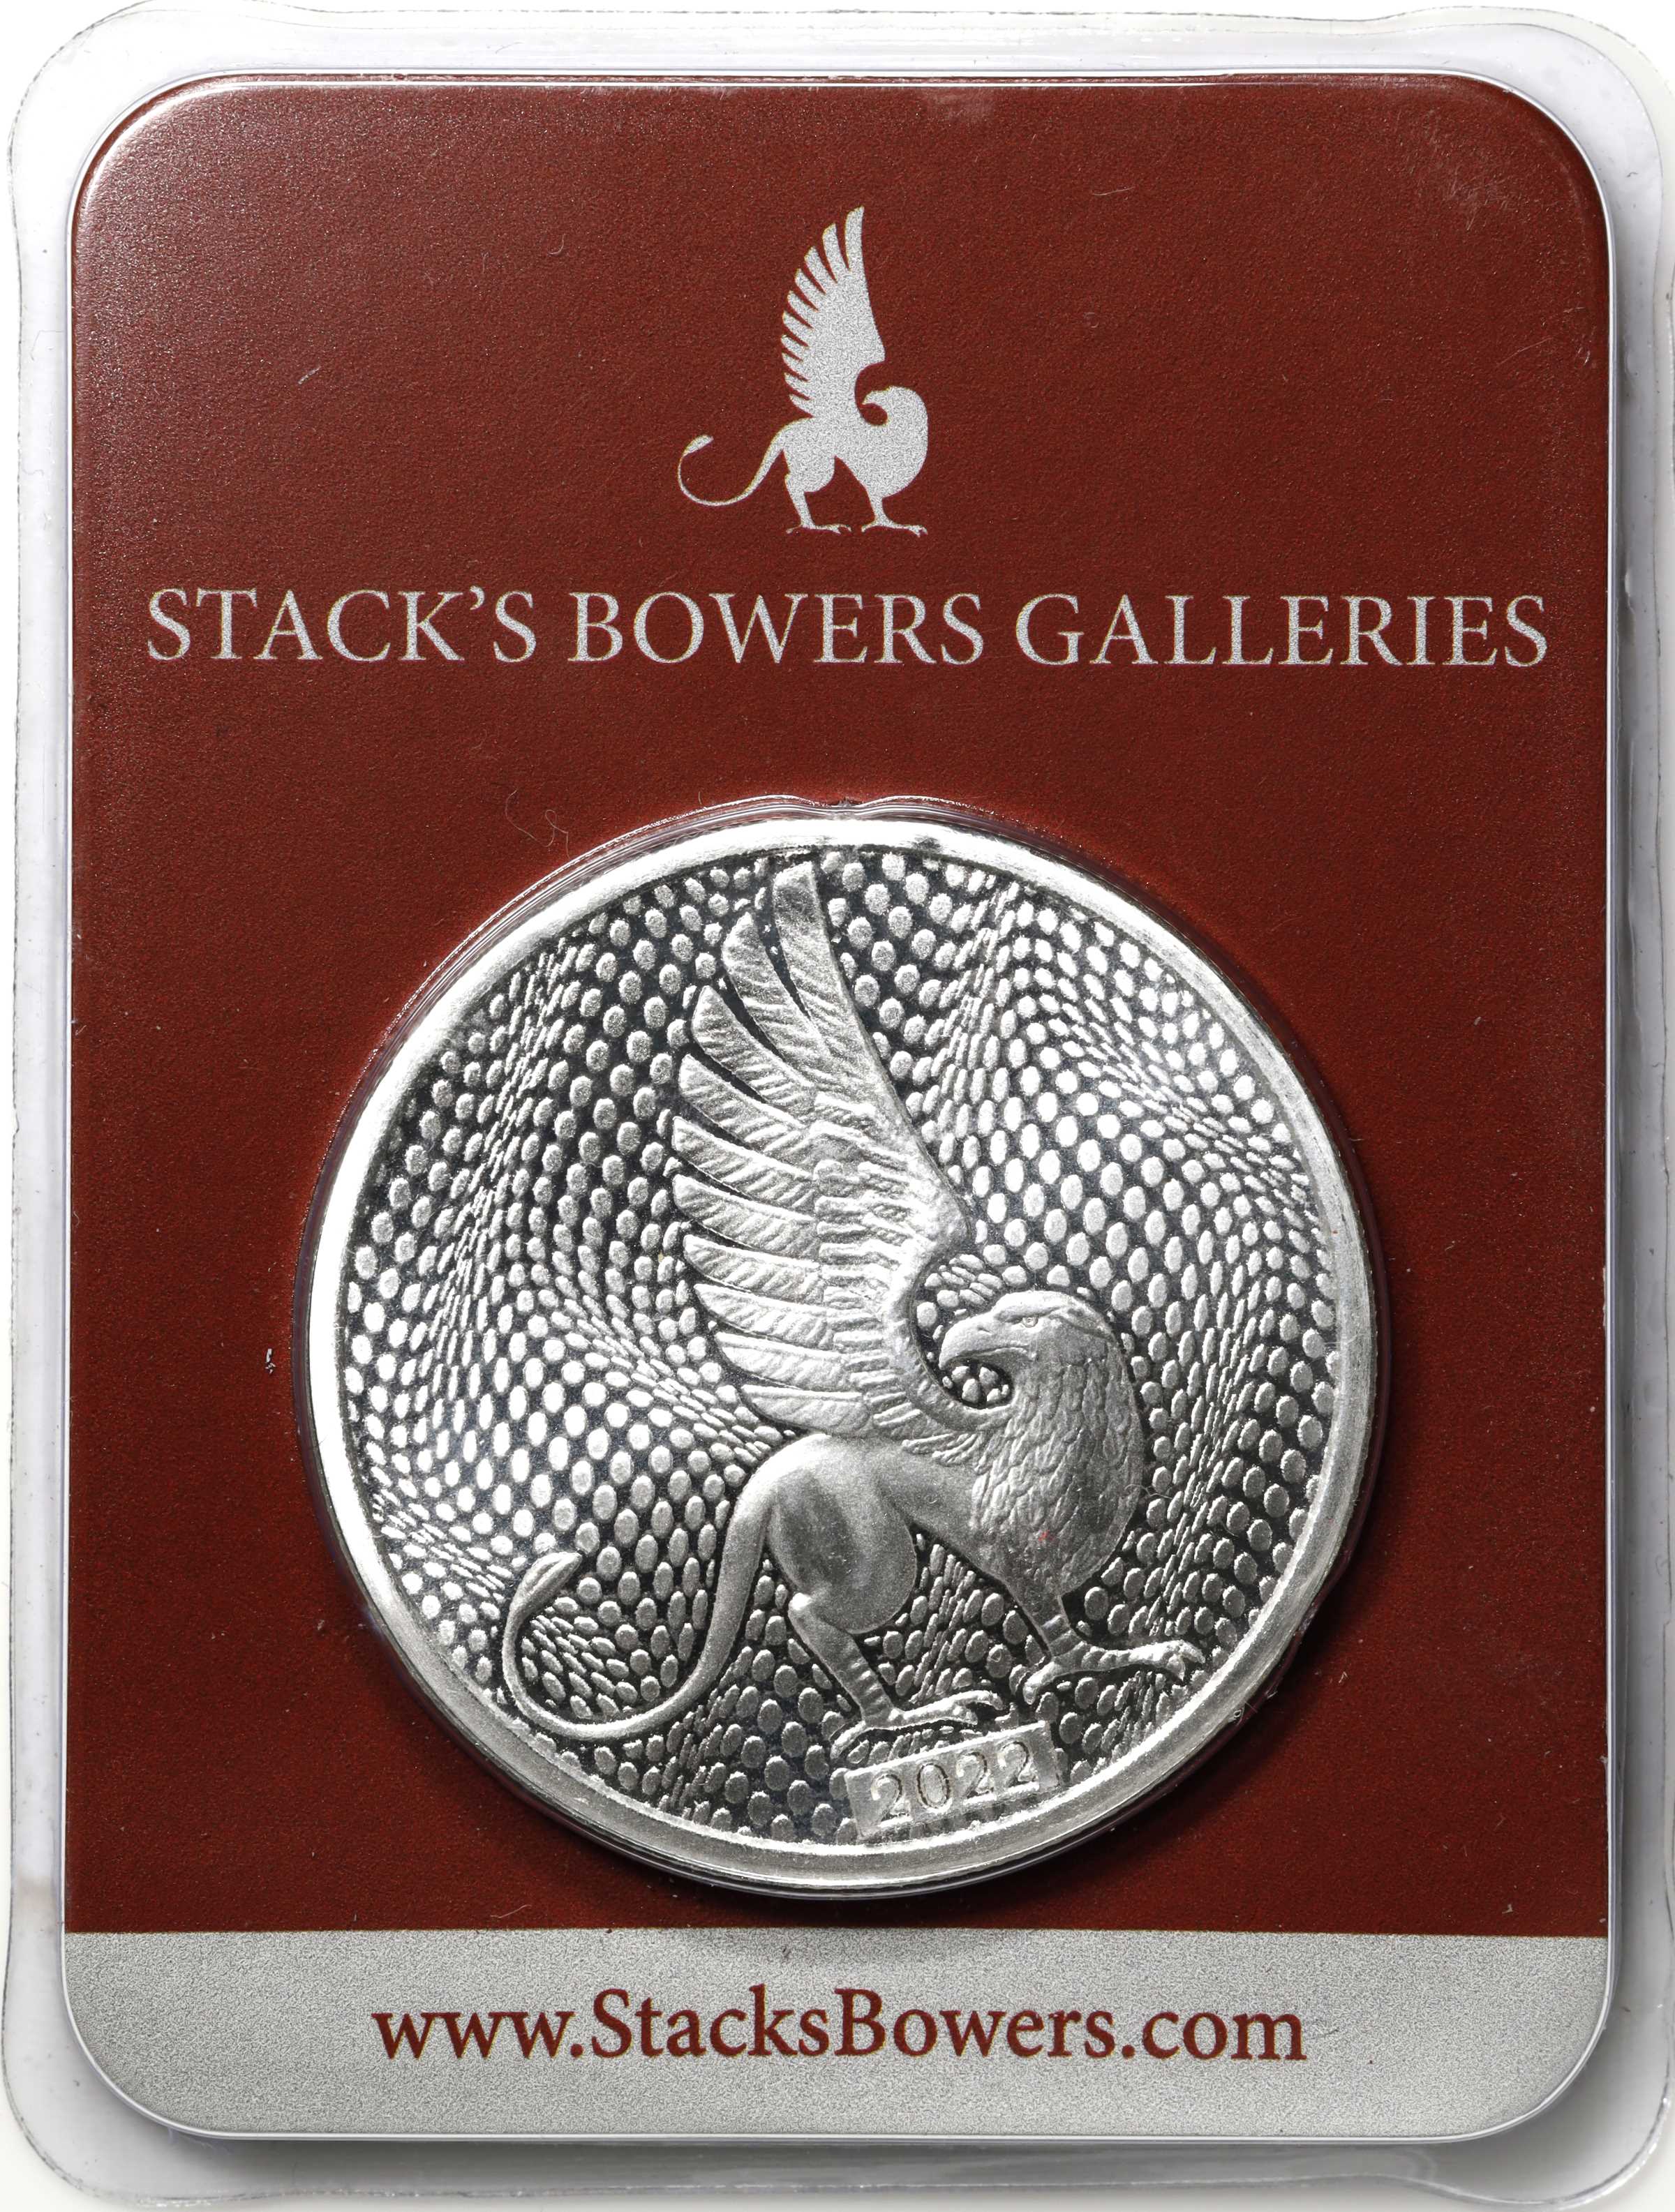 1 oz, 31.104 g ASW). Stack's Bowers Silver Round in Clamshell Case